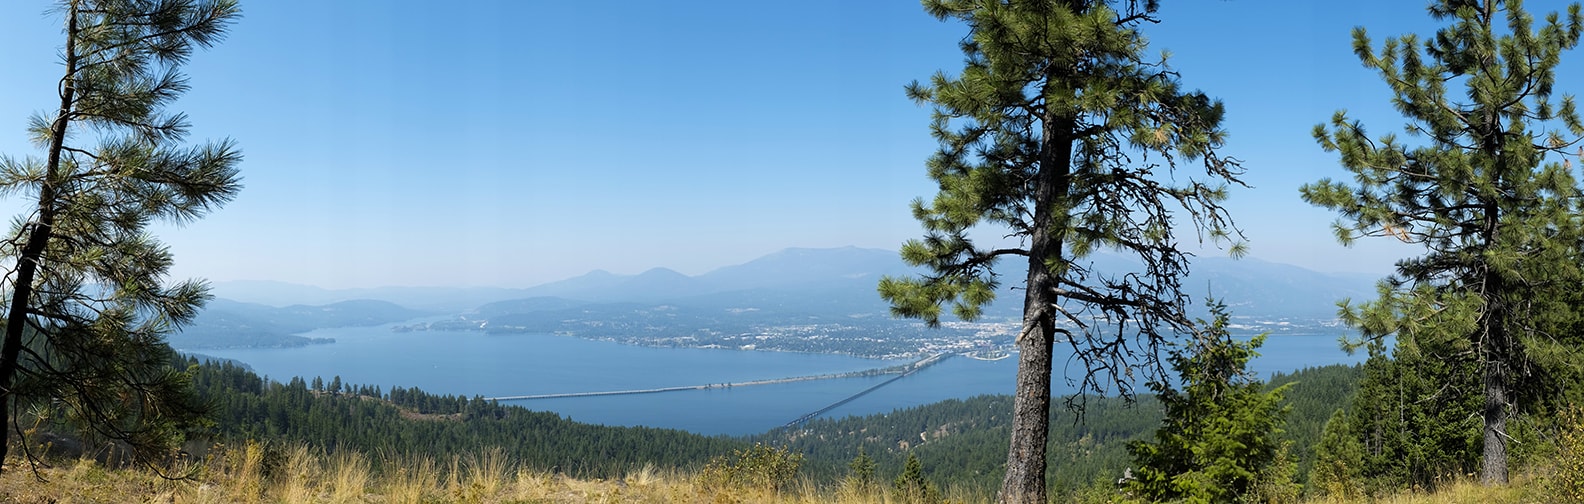 High on a mountain, the ariel view of Sandpoint and Lake Pen Oreille in Idaho.